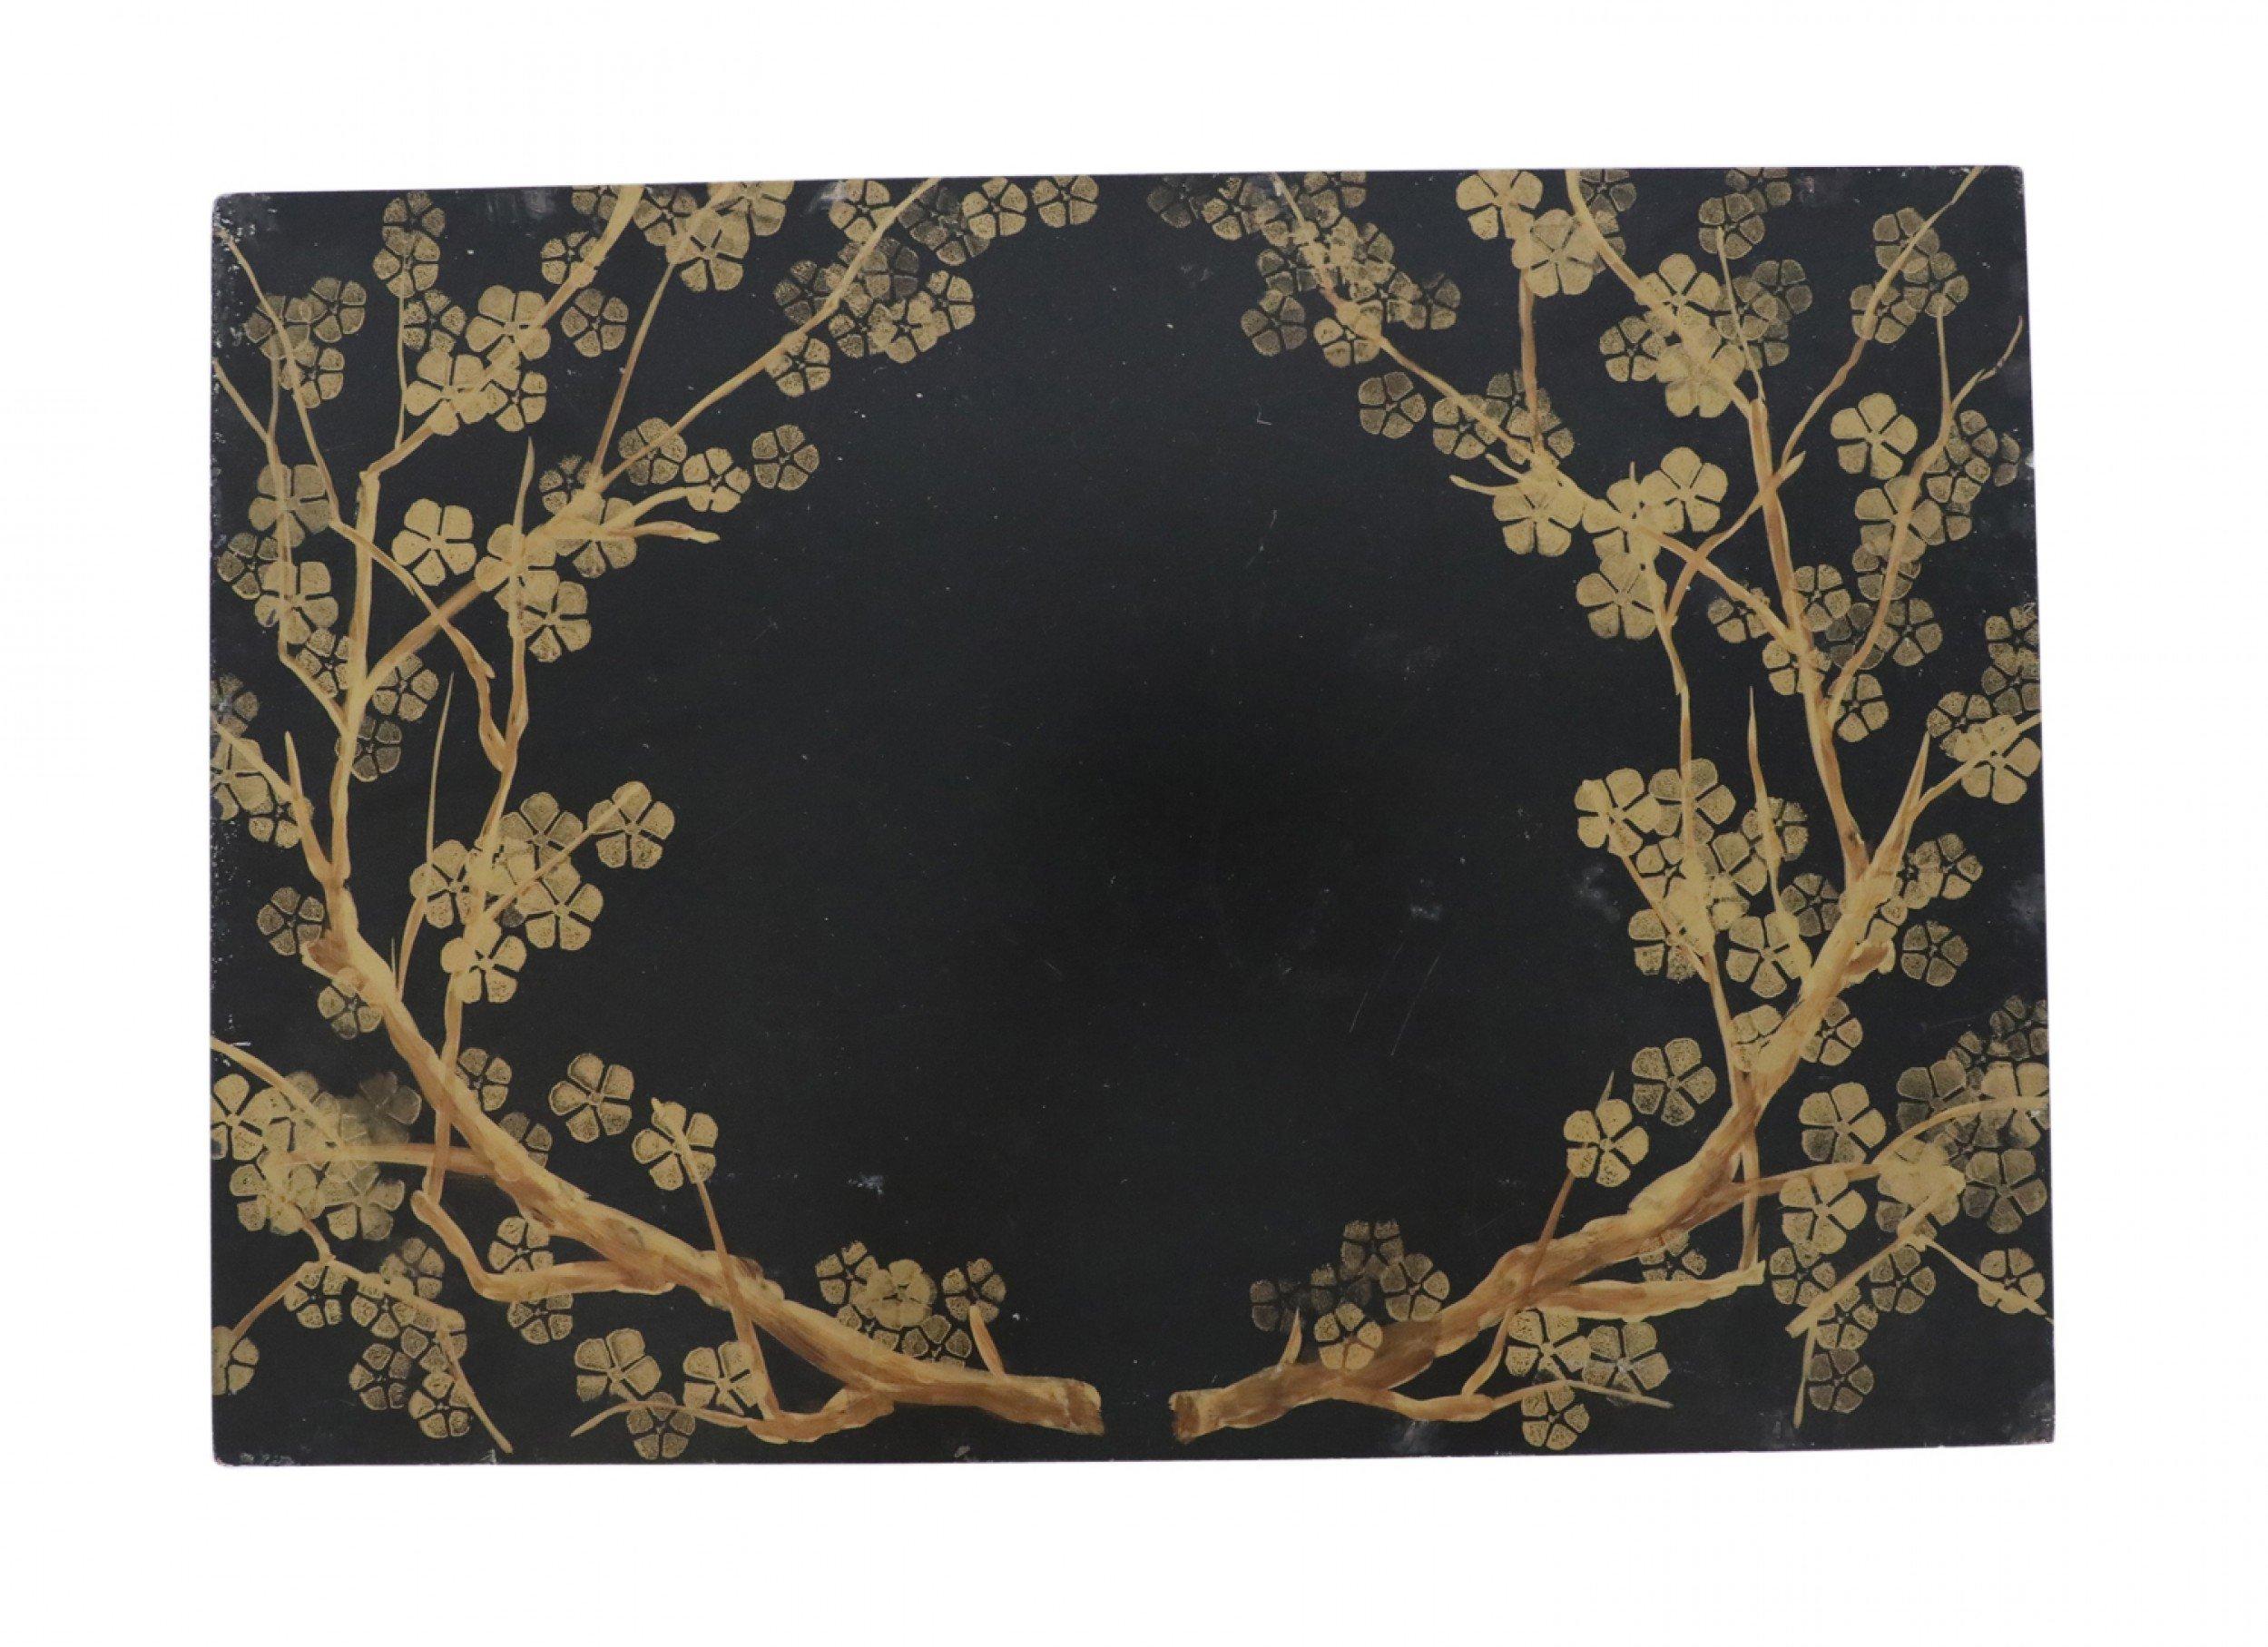 Chinese Gold and Black Painted Cherry Blossom Motif Decorative Box For Sale 2